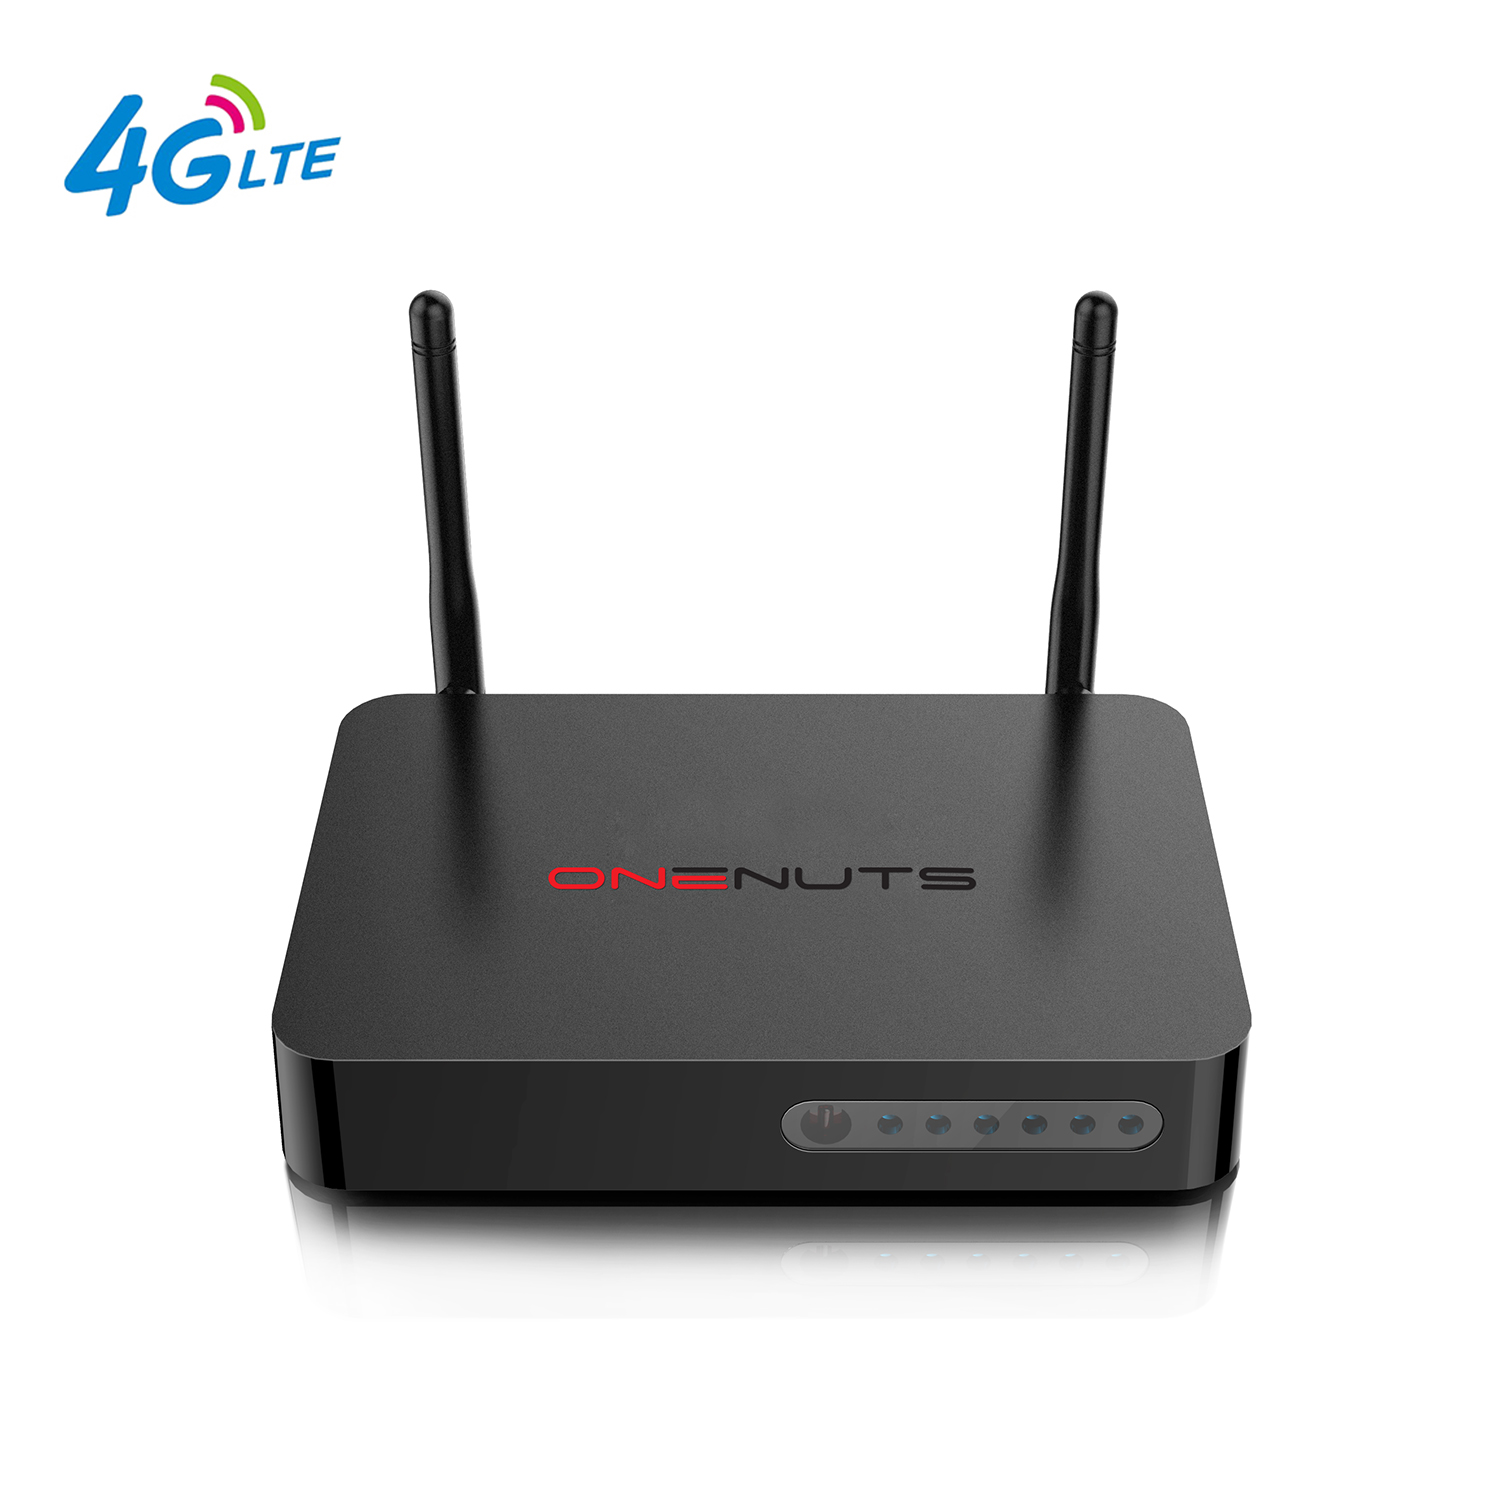 Smart TV Box Android, TV Box Android Huawei WCDMA Modem integrato